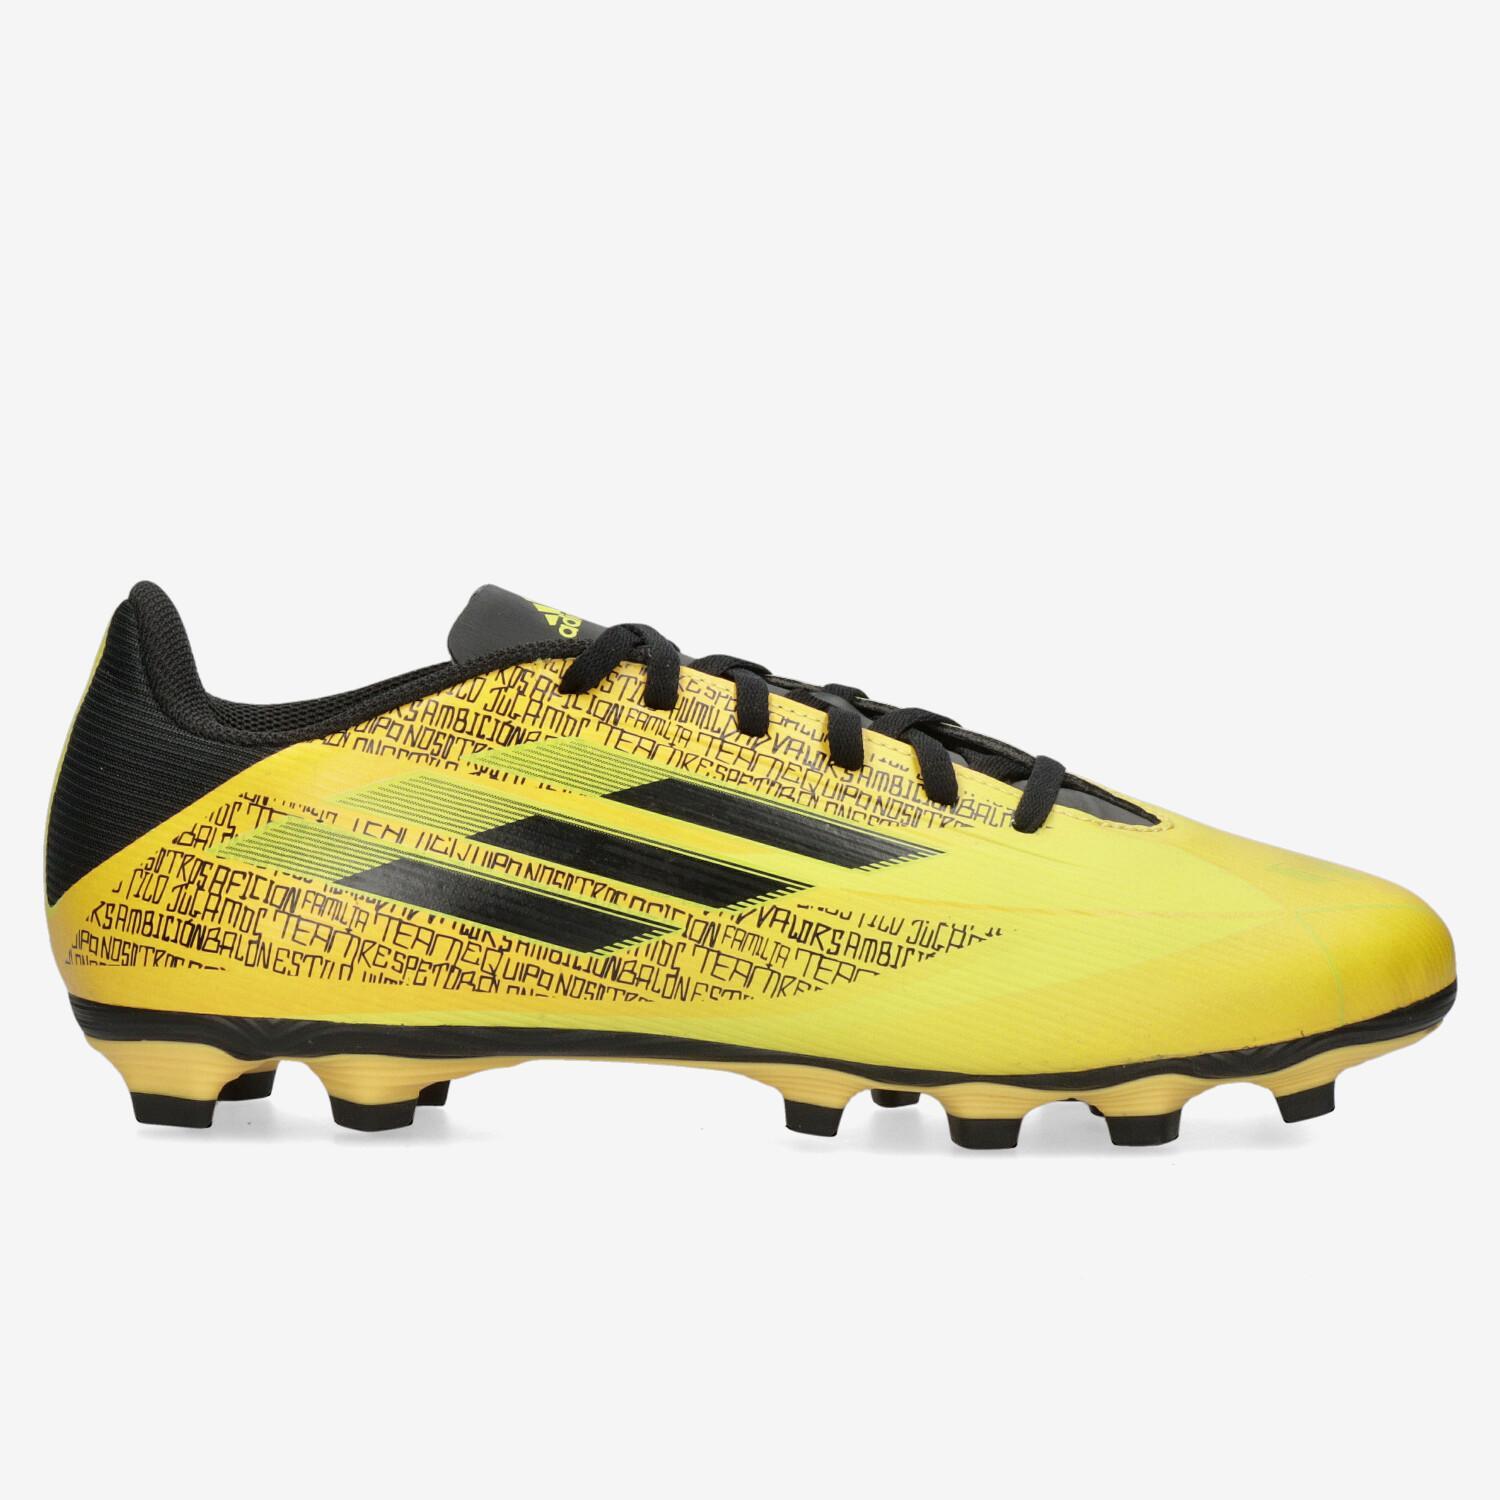 adidas X Spedflow 4 - Jaune - Chaussures Football sports taille 40.5